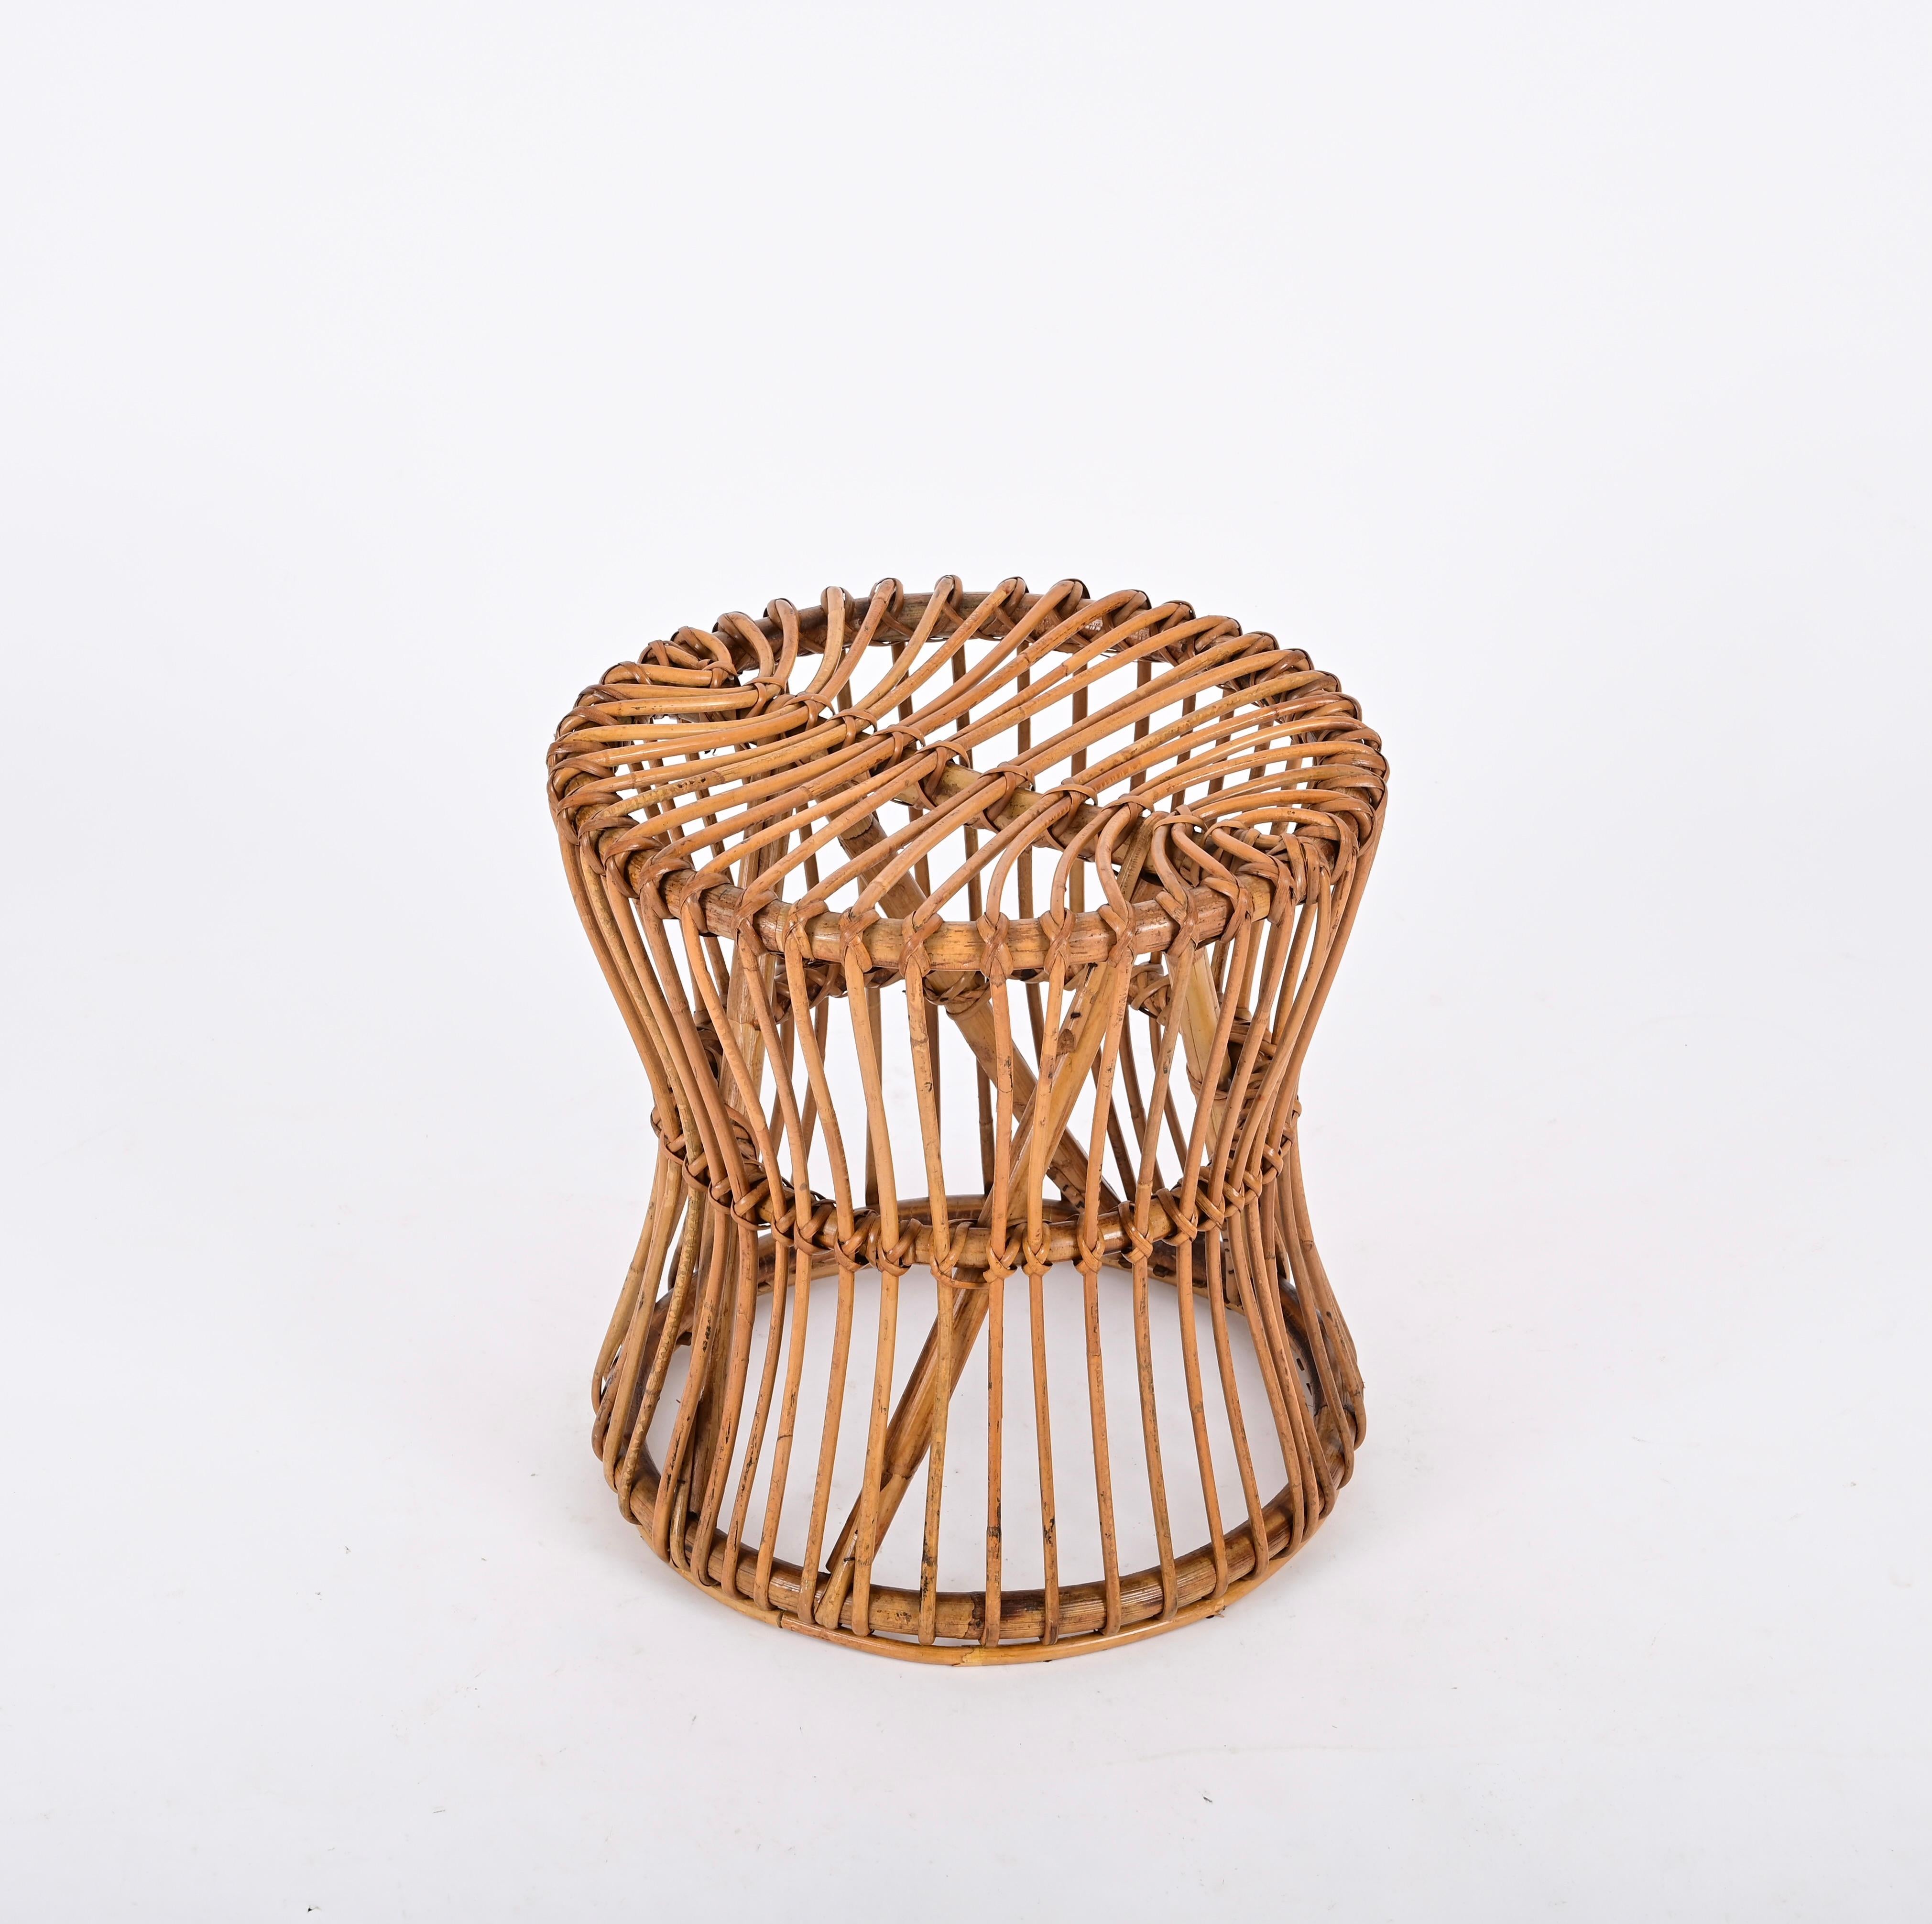 Midcentury French Riviera Pouf Stool in Rattan and Woven Wicker, Italy, 1960s For Sale 3